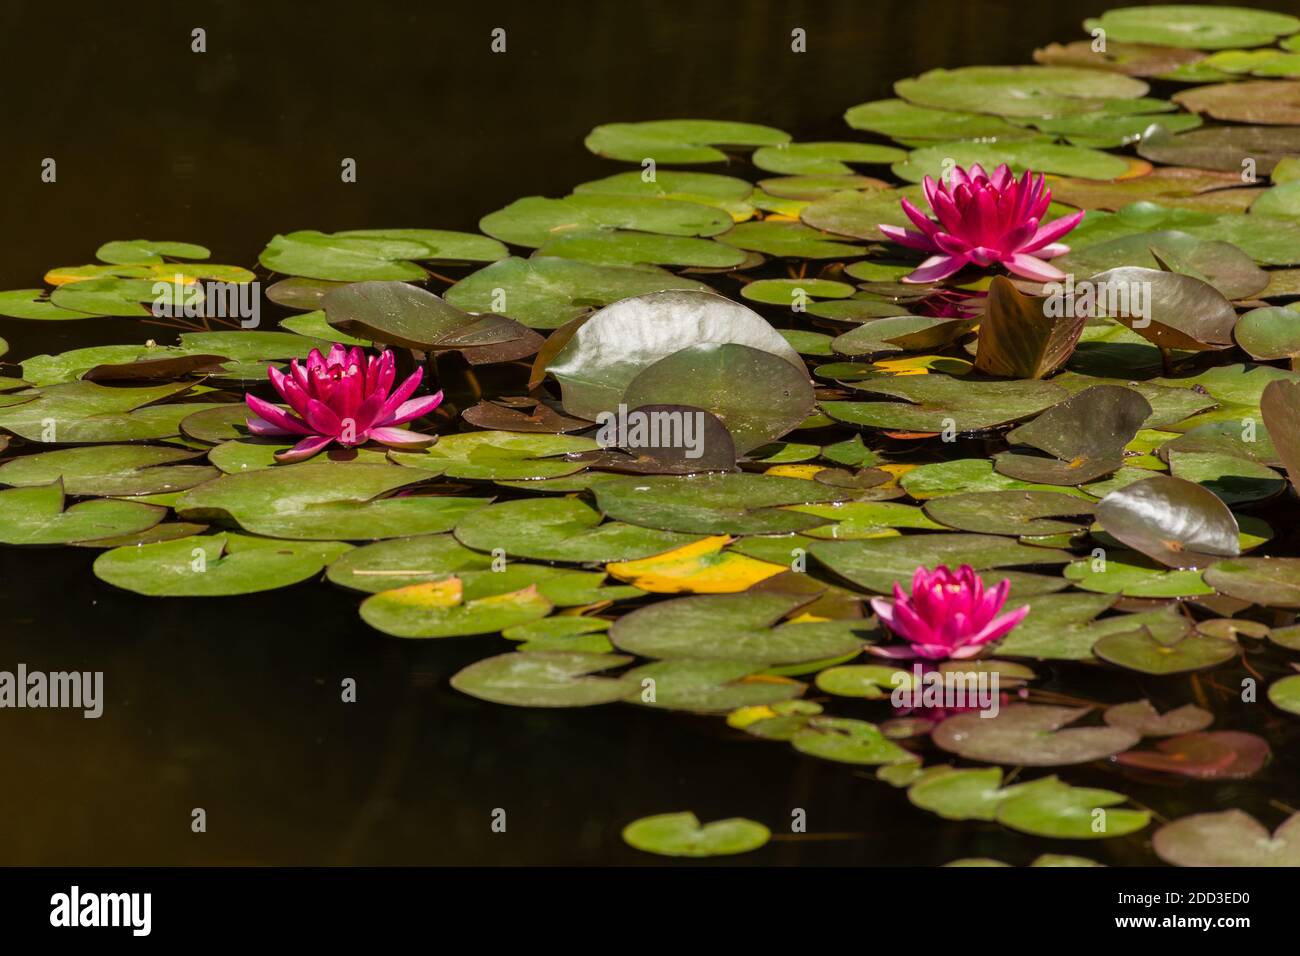 Pink lotuses bloom on an ornamental pond in the garden. Lotus flower Marliacea Rosea or pink water Lily lat. Nymphaea. Floral natural background. Brig Stock Photo